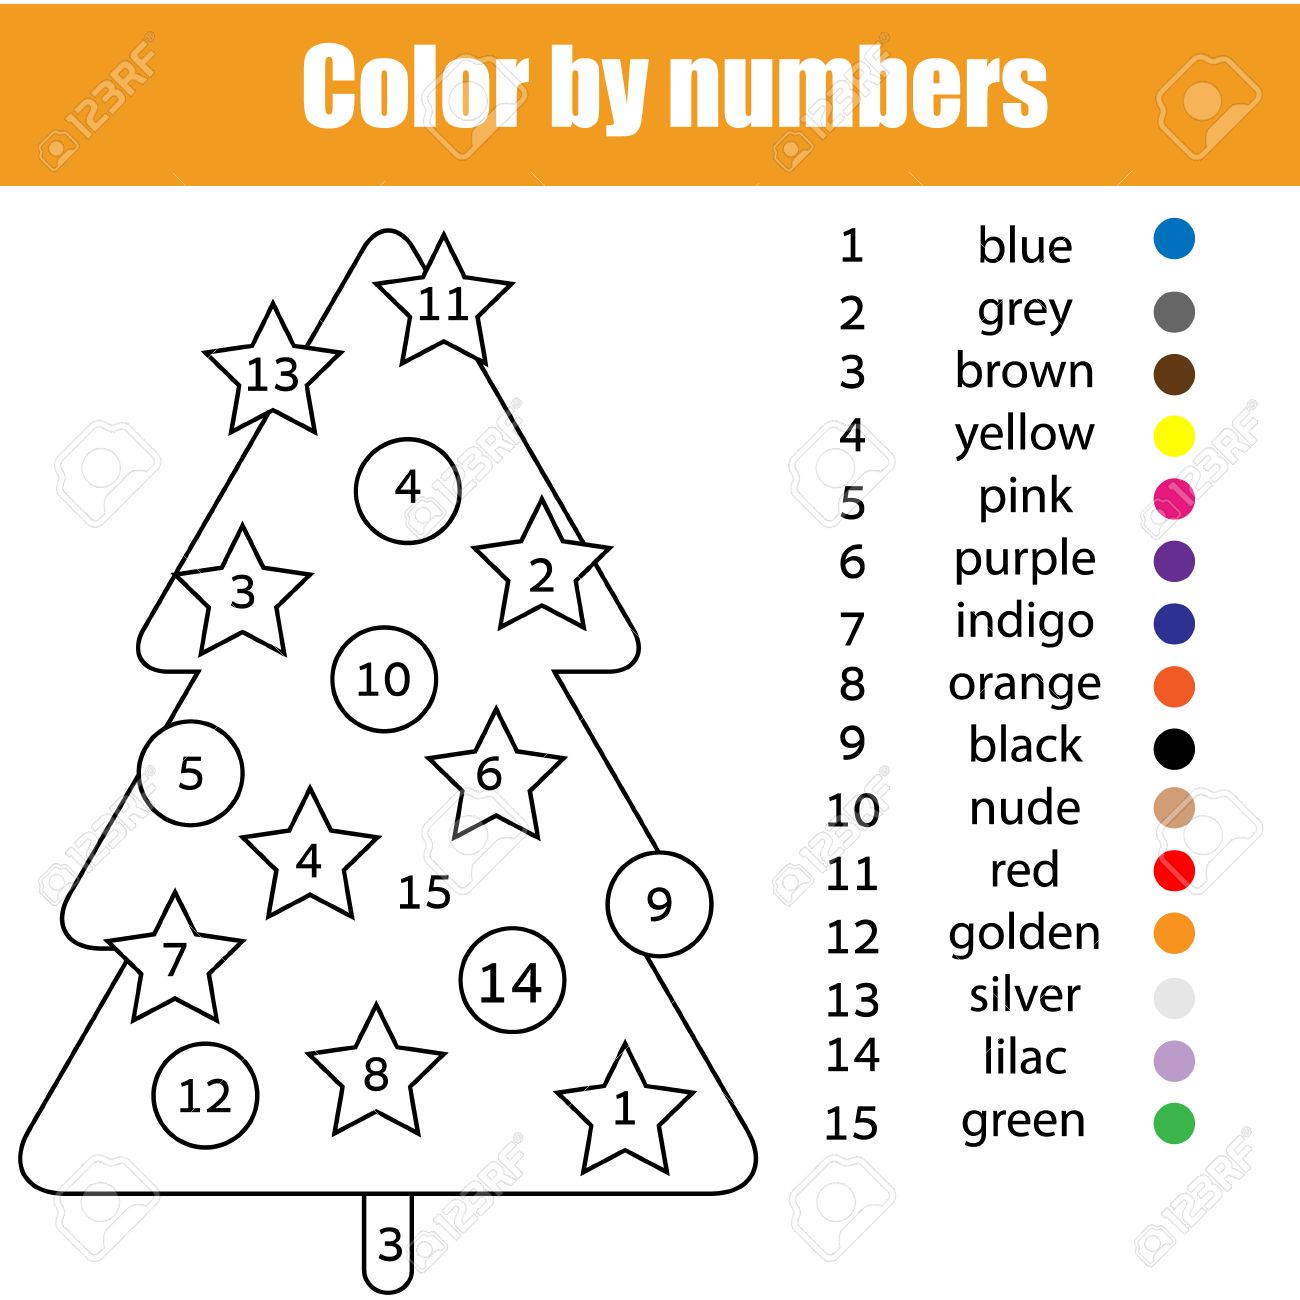 Coloring page with christmas tree color by numbers task printable worksheet for kids preschool age royalty free svg cliparts vectors and stock illustration image